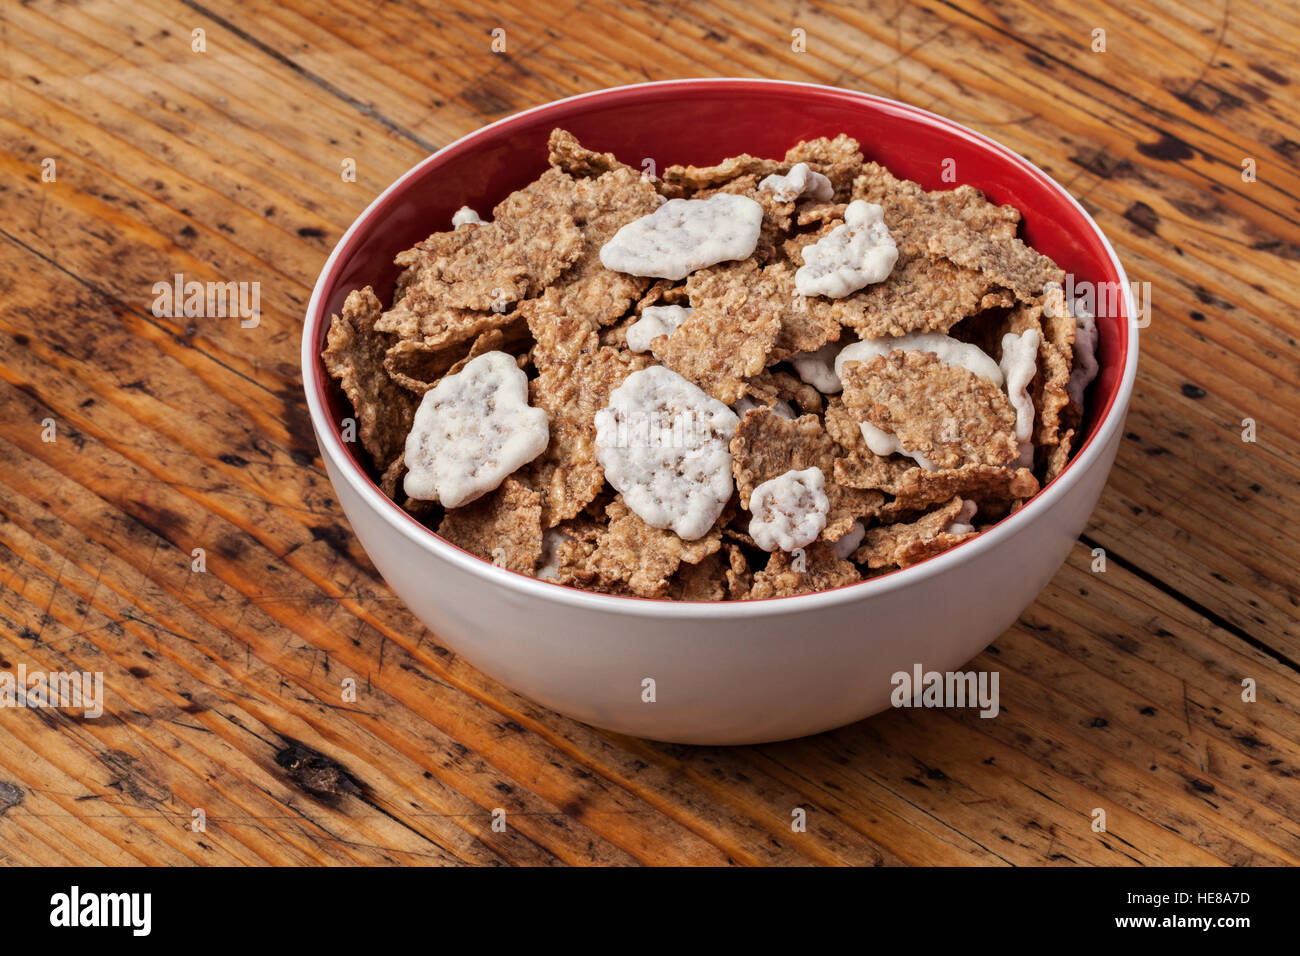 Image of bowl muesli on a wooden table. Stock Photo